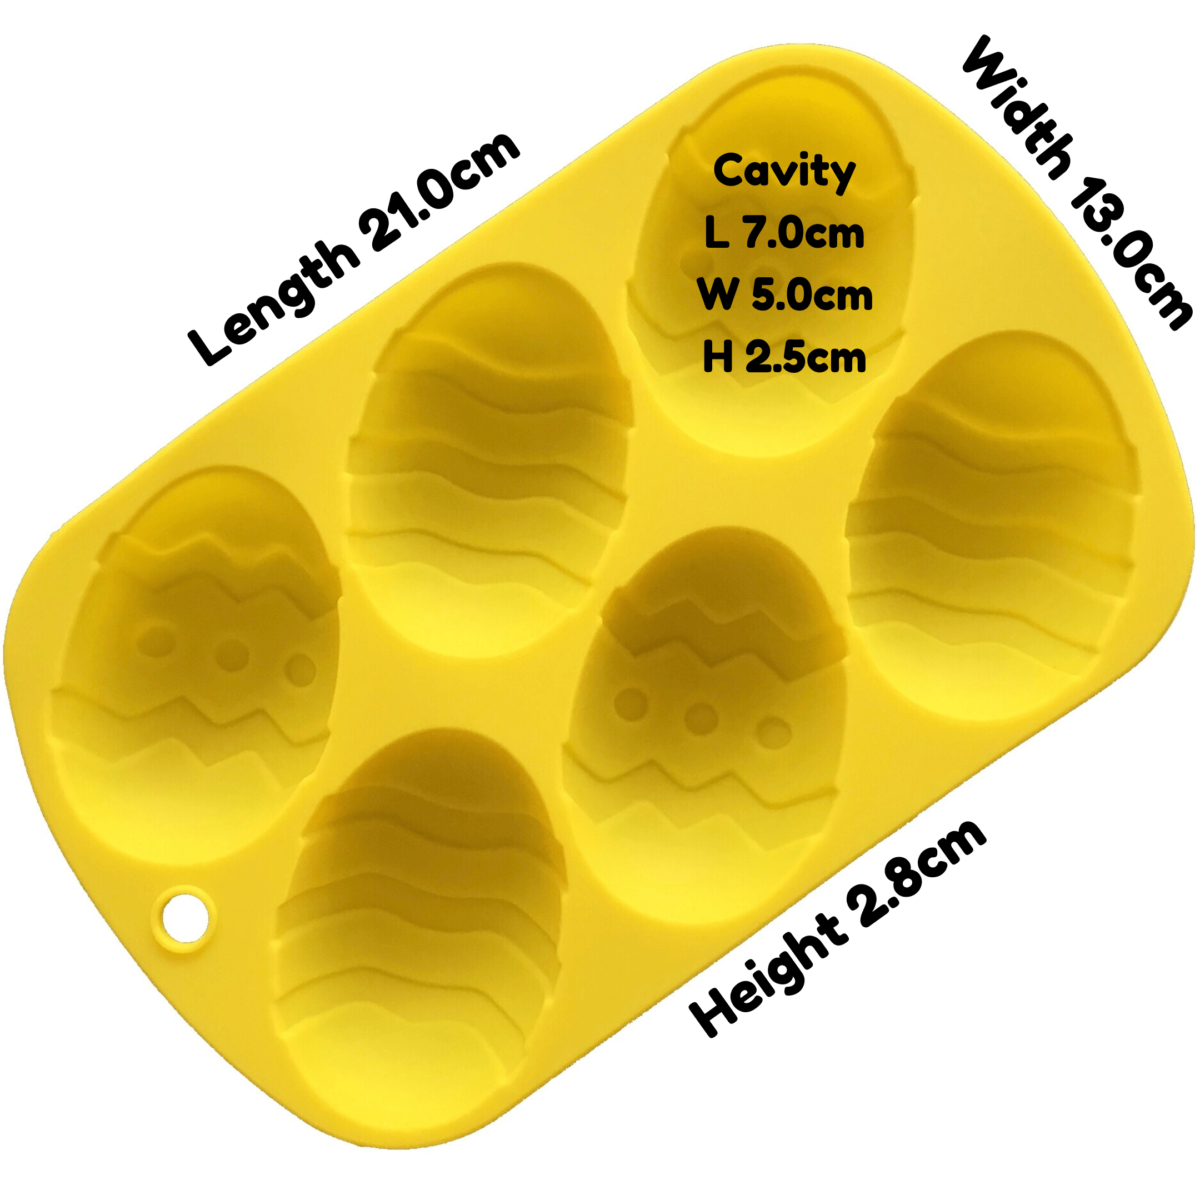 written dimensions of yellow easter egg silicone mould with six cavities and two different egg designs